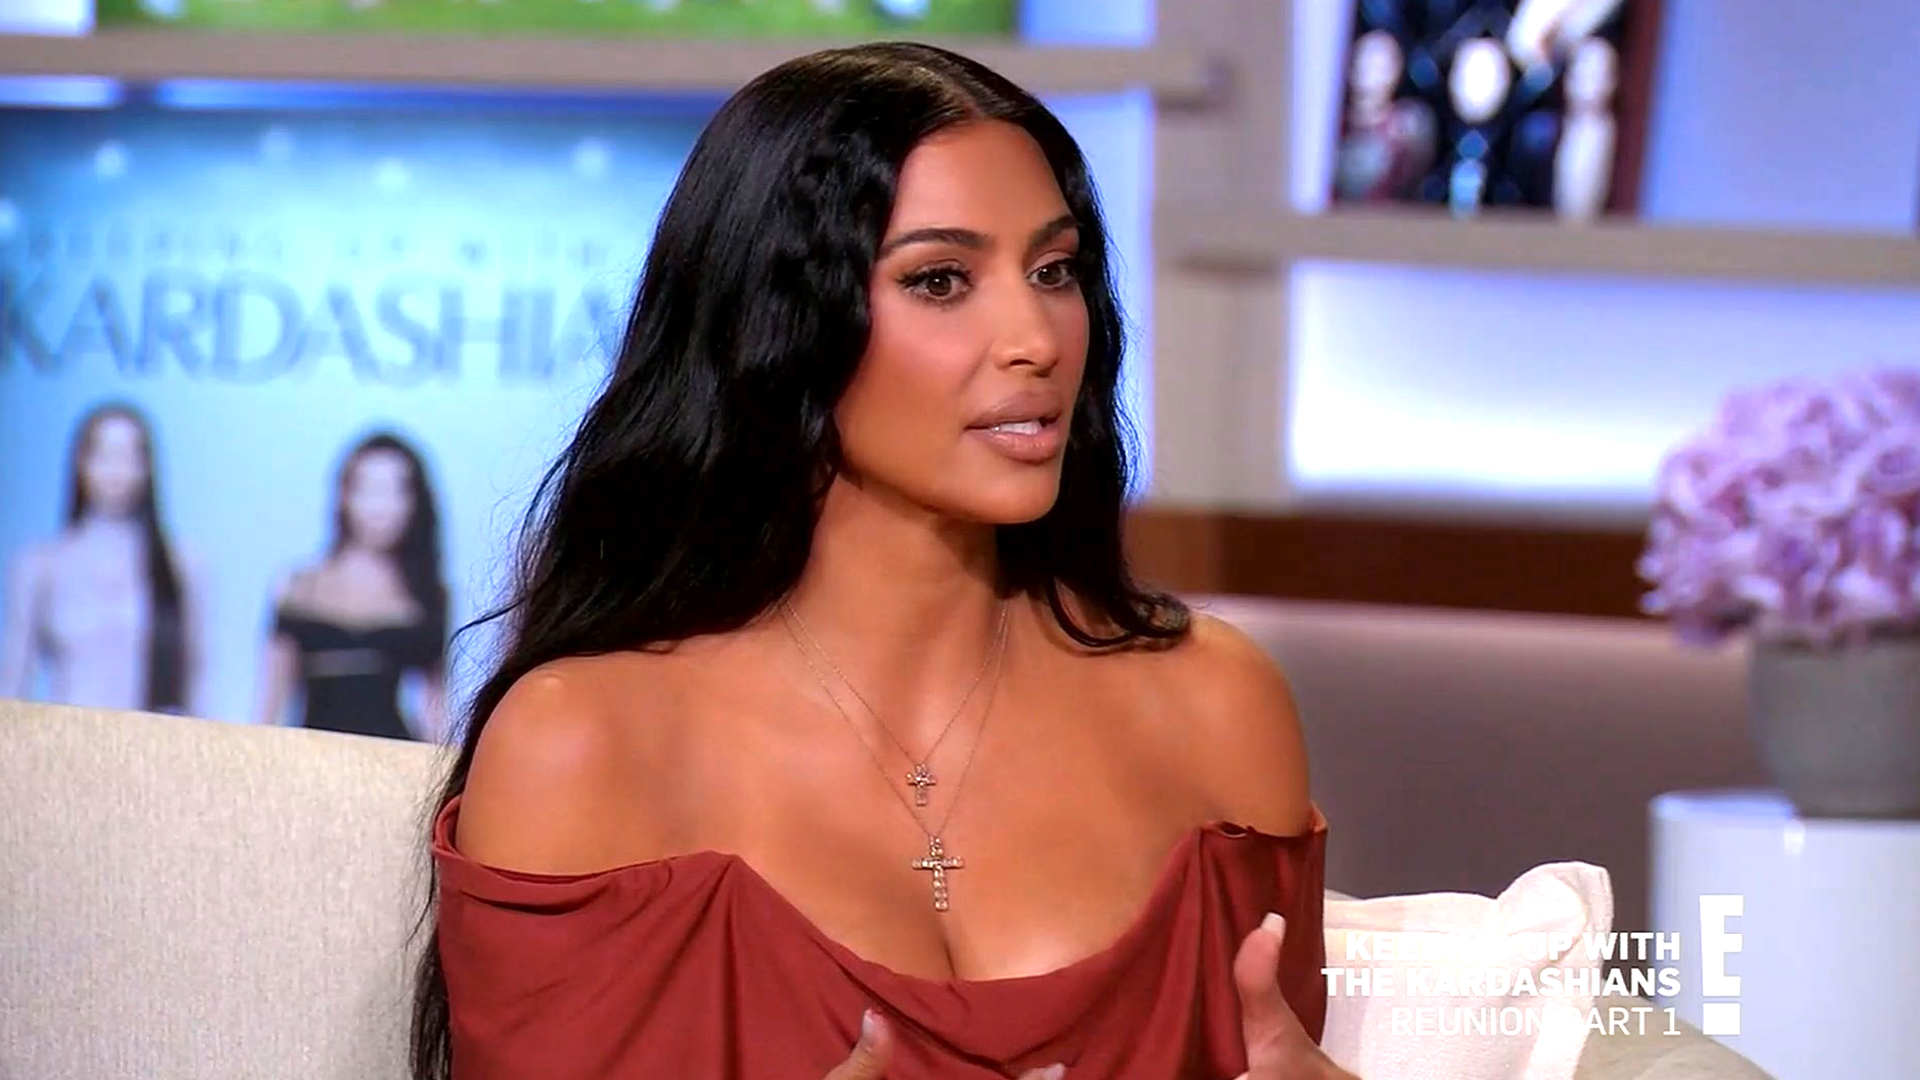 All Kim Kardashian Porn - Kim Kardashian opens up about infamous sex tape: 'The one thing that I wish  didn't exist'